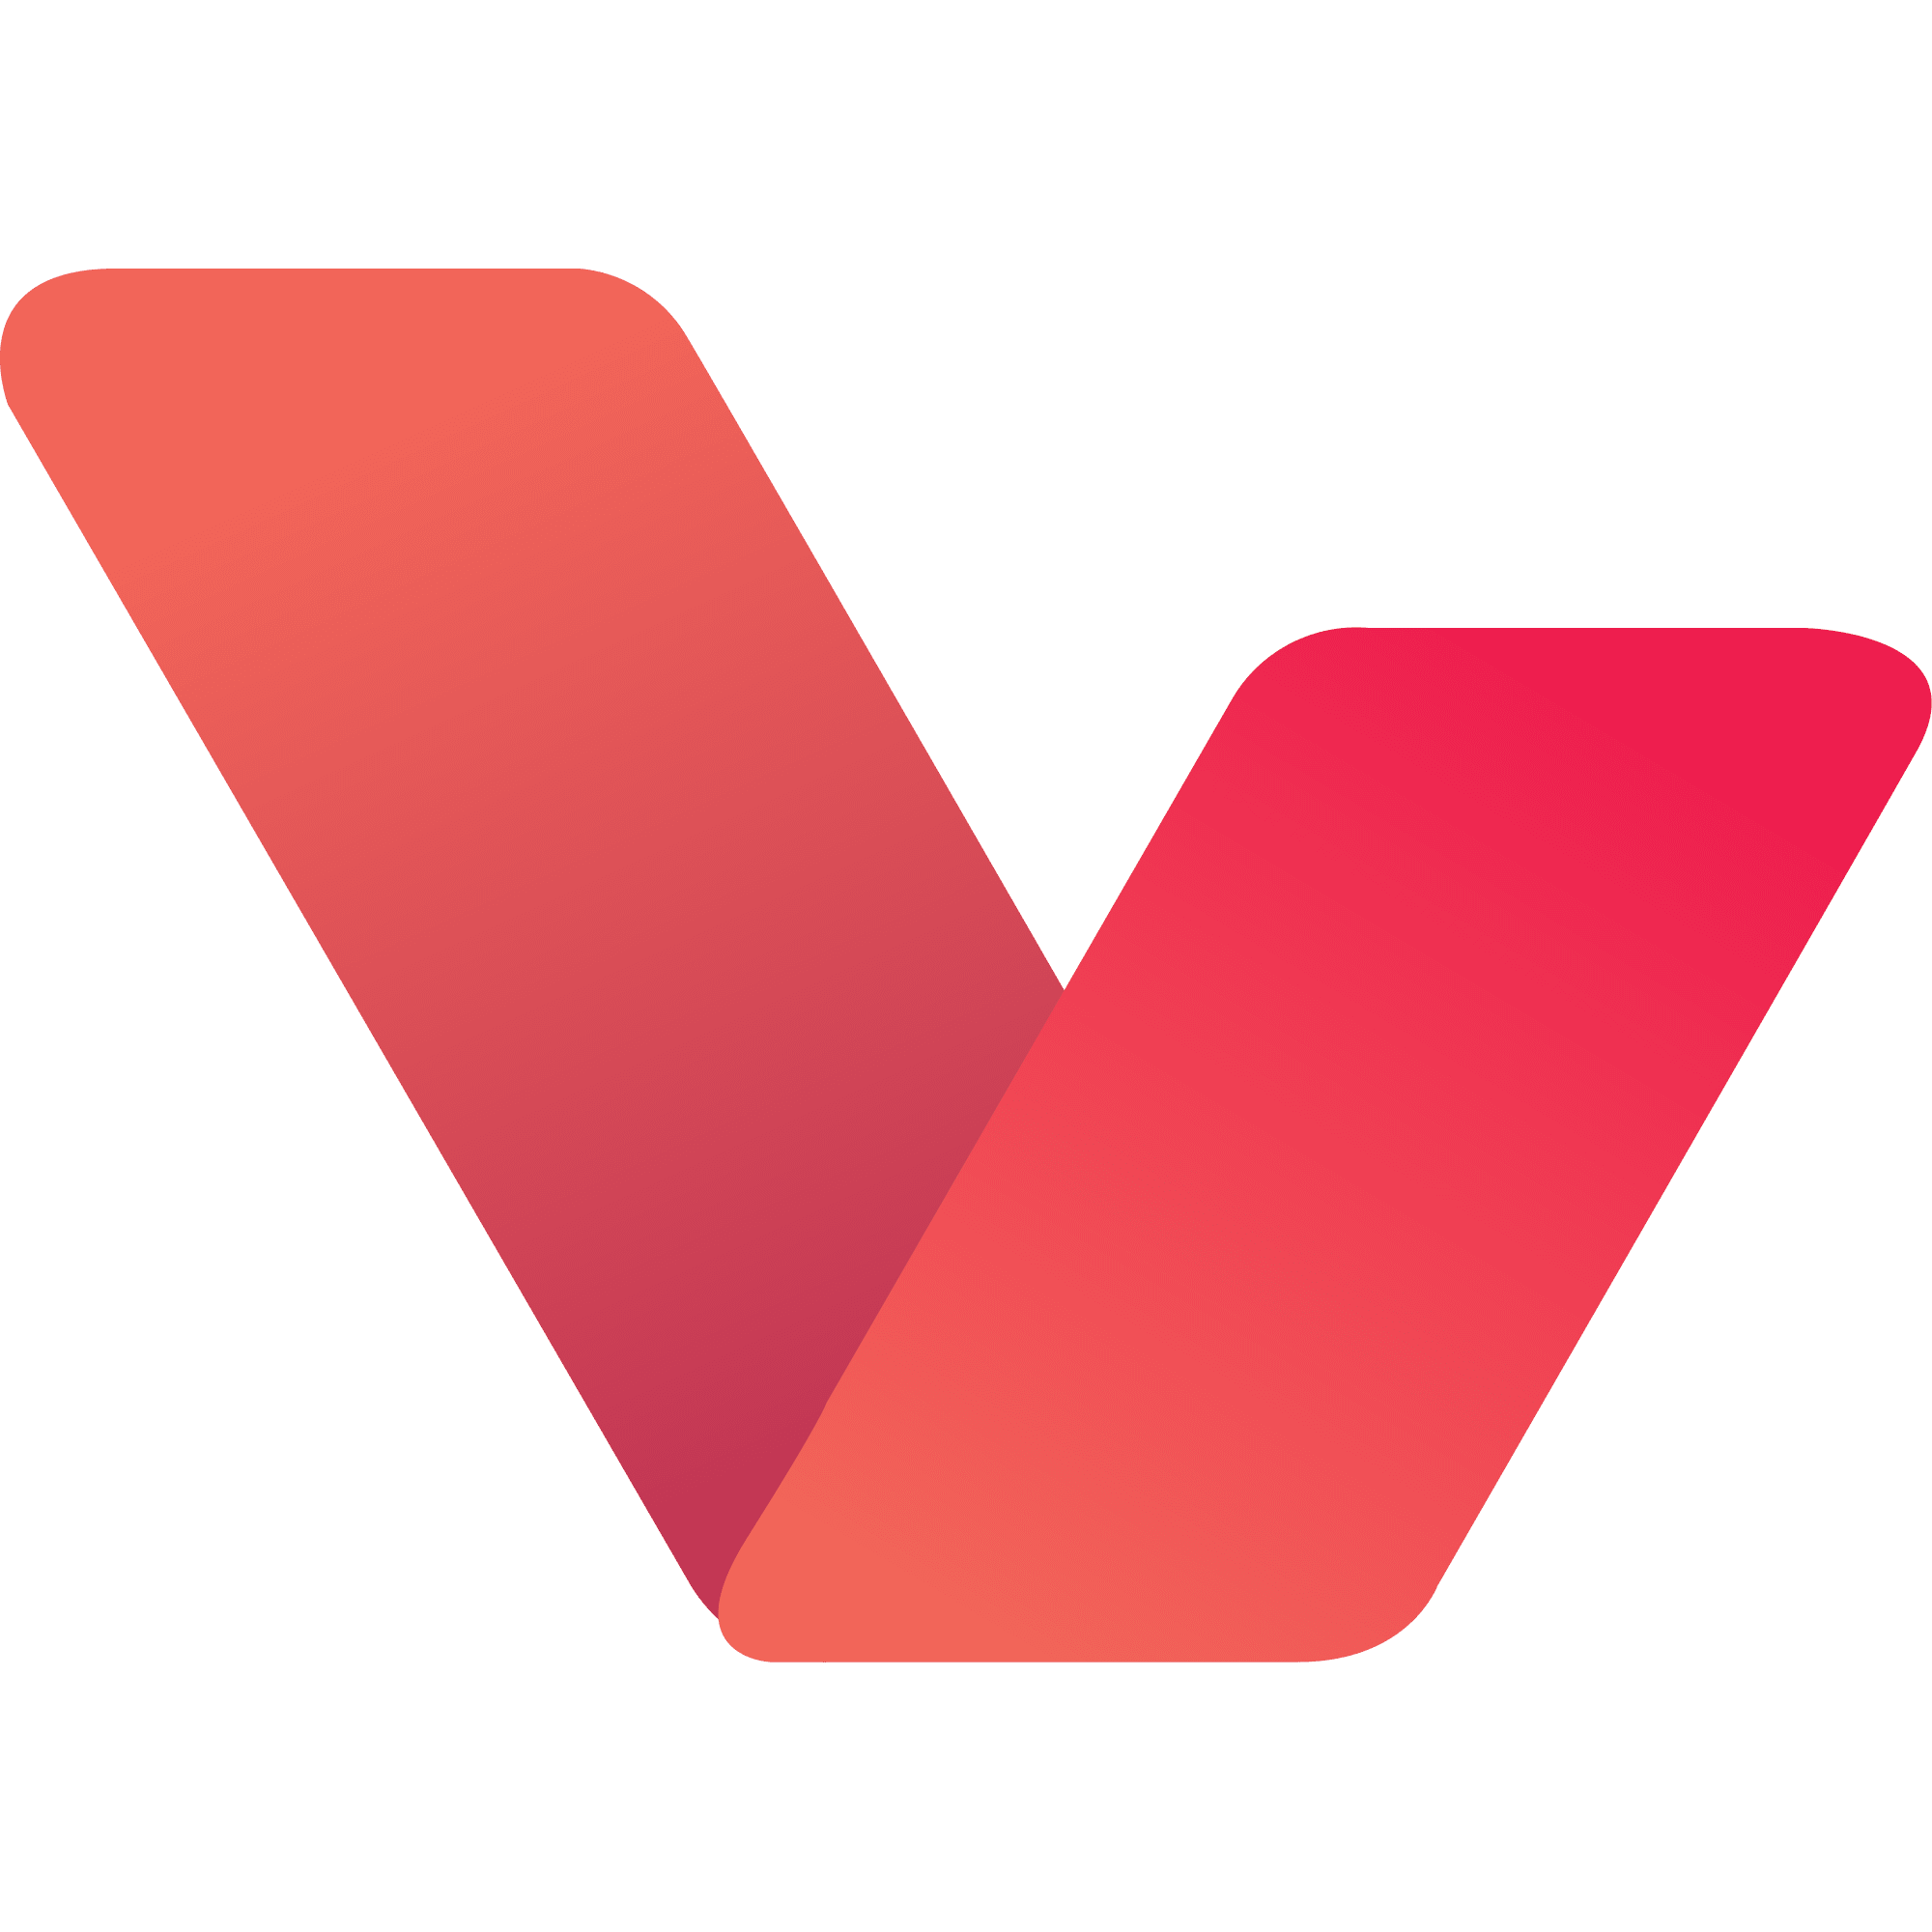 Lympo logo in png format